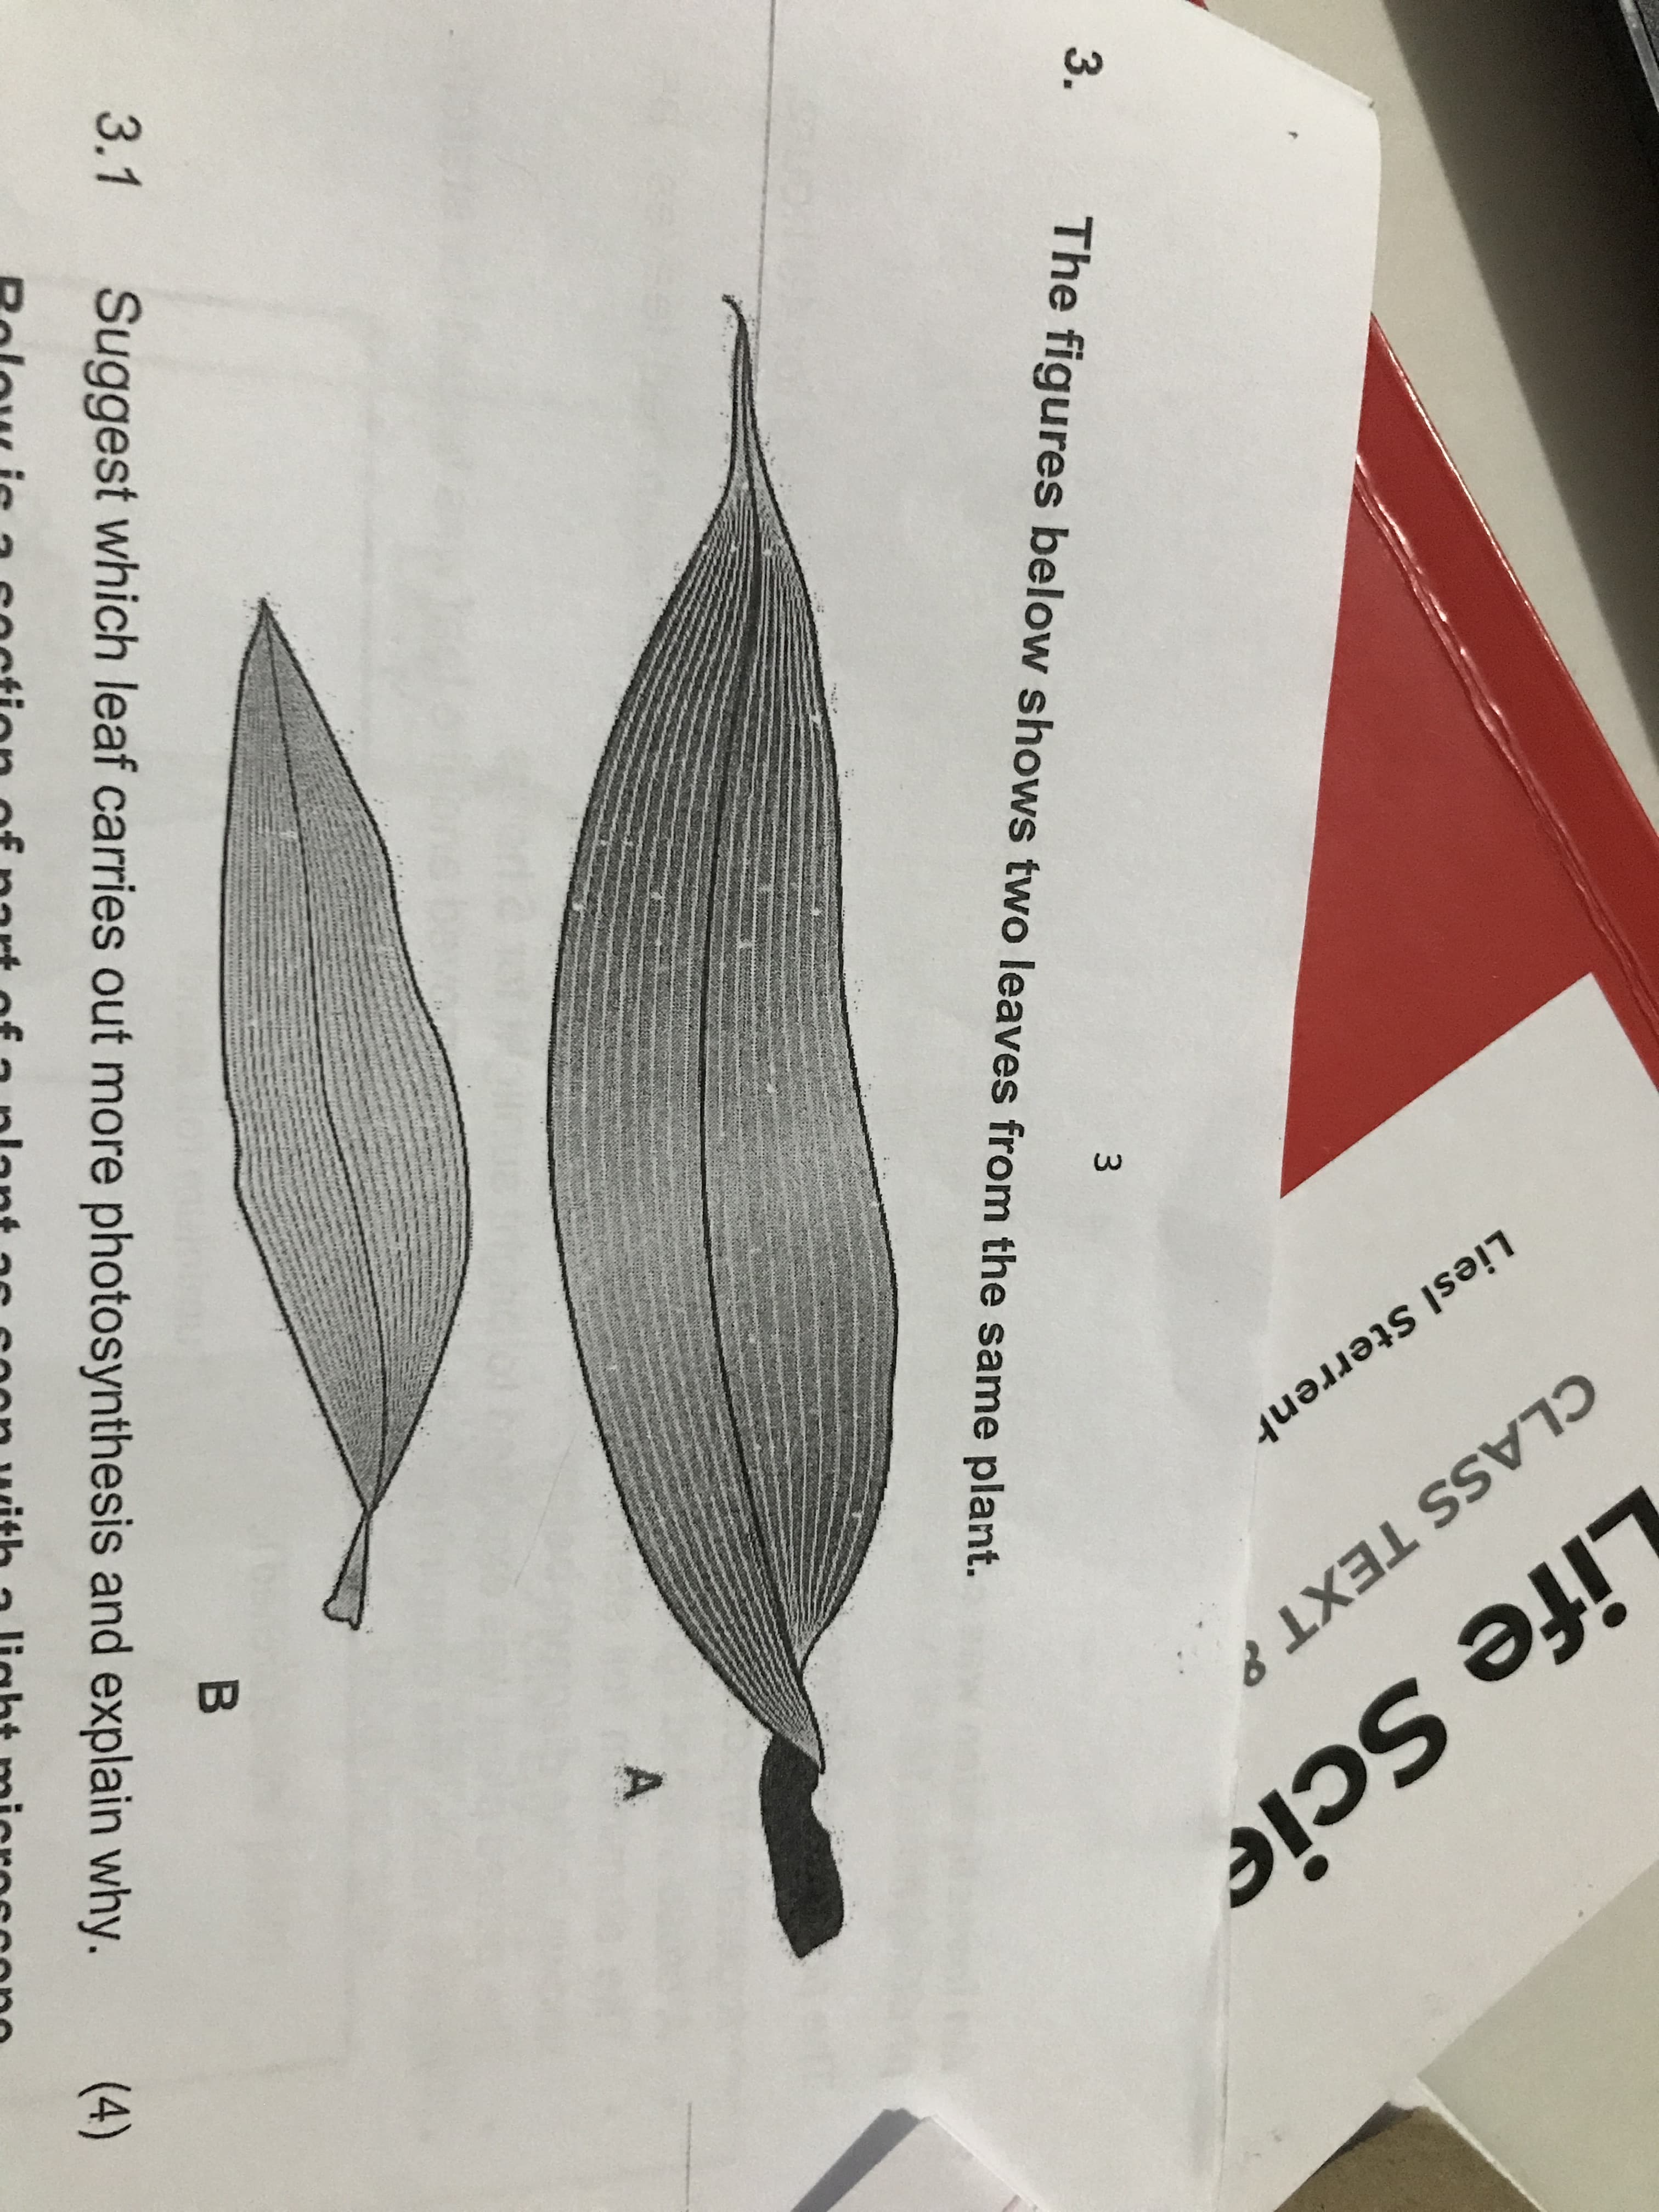 3.
The figures below shows two leaves from the same plant.
3.1
Suggest which leaf carries out more photosynthesis and explain why.
(4)
Below is
Rolow ic a soction of nart of a plant as
section
on with a light micressone
Life Scie
CLASS TEXT 8
Liesl Sterrenh
3.
